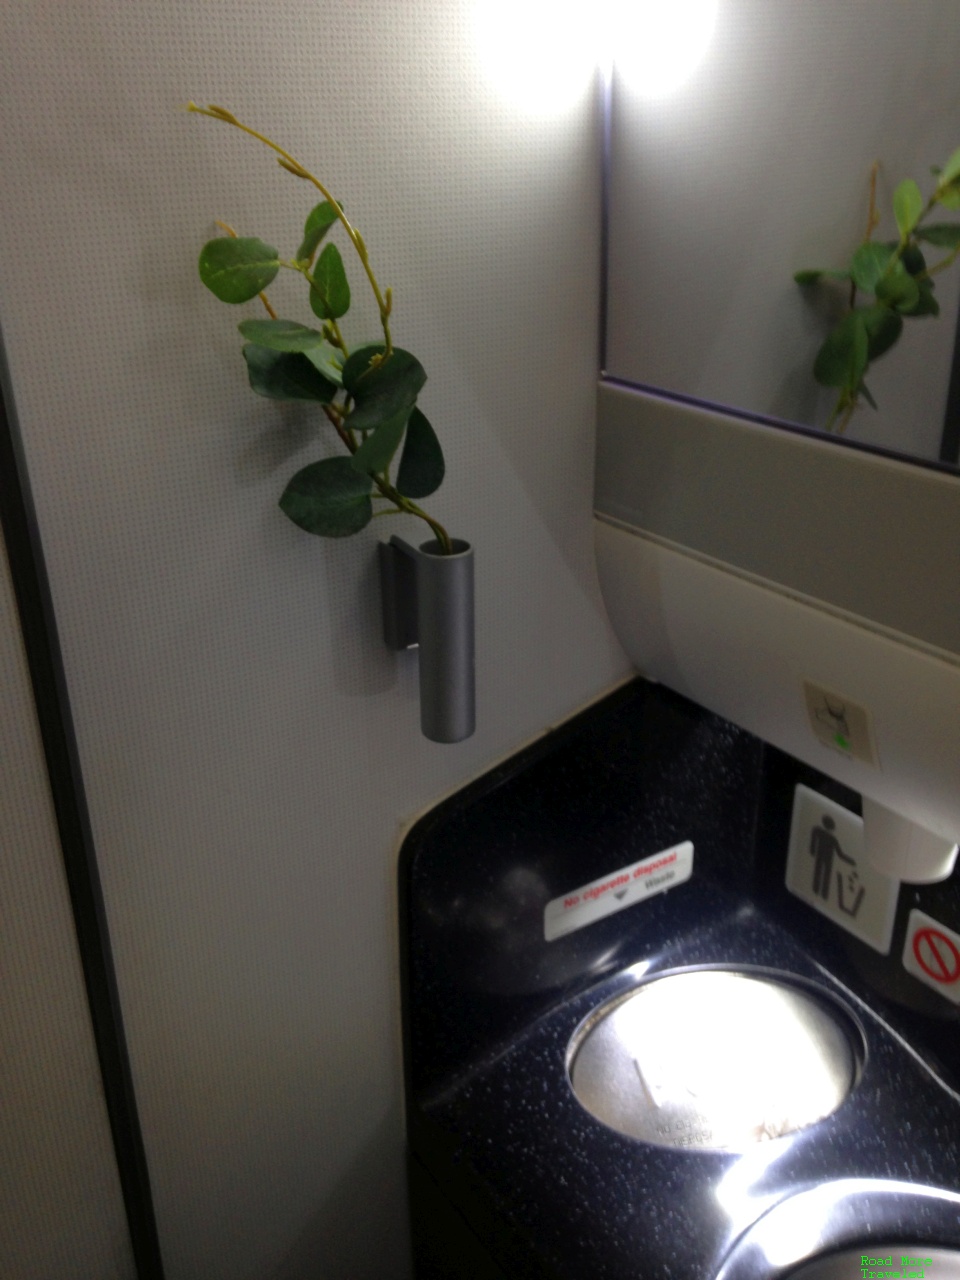 SAS Business Class lavatory with plant